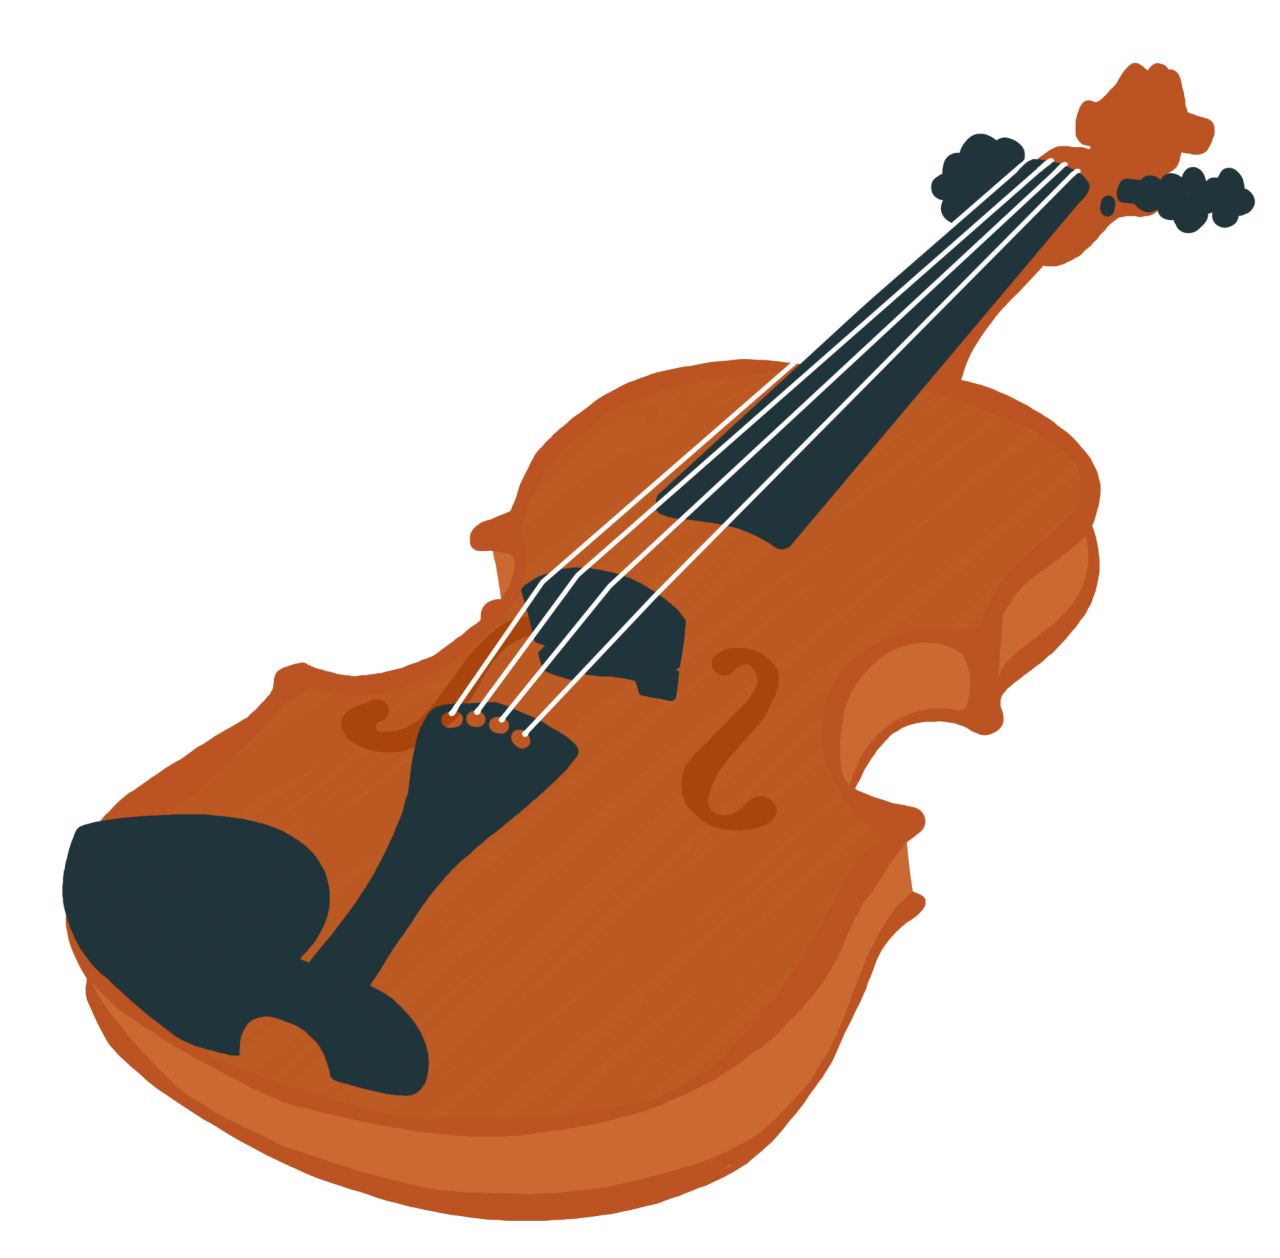 Classical Music Instrument PNG Image HD